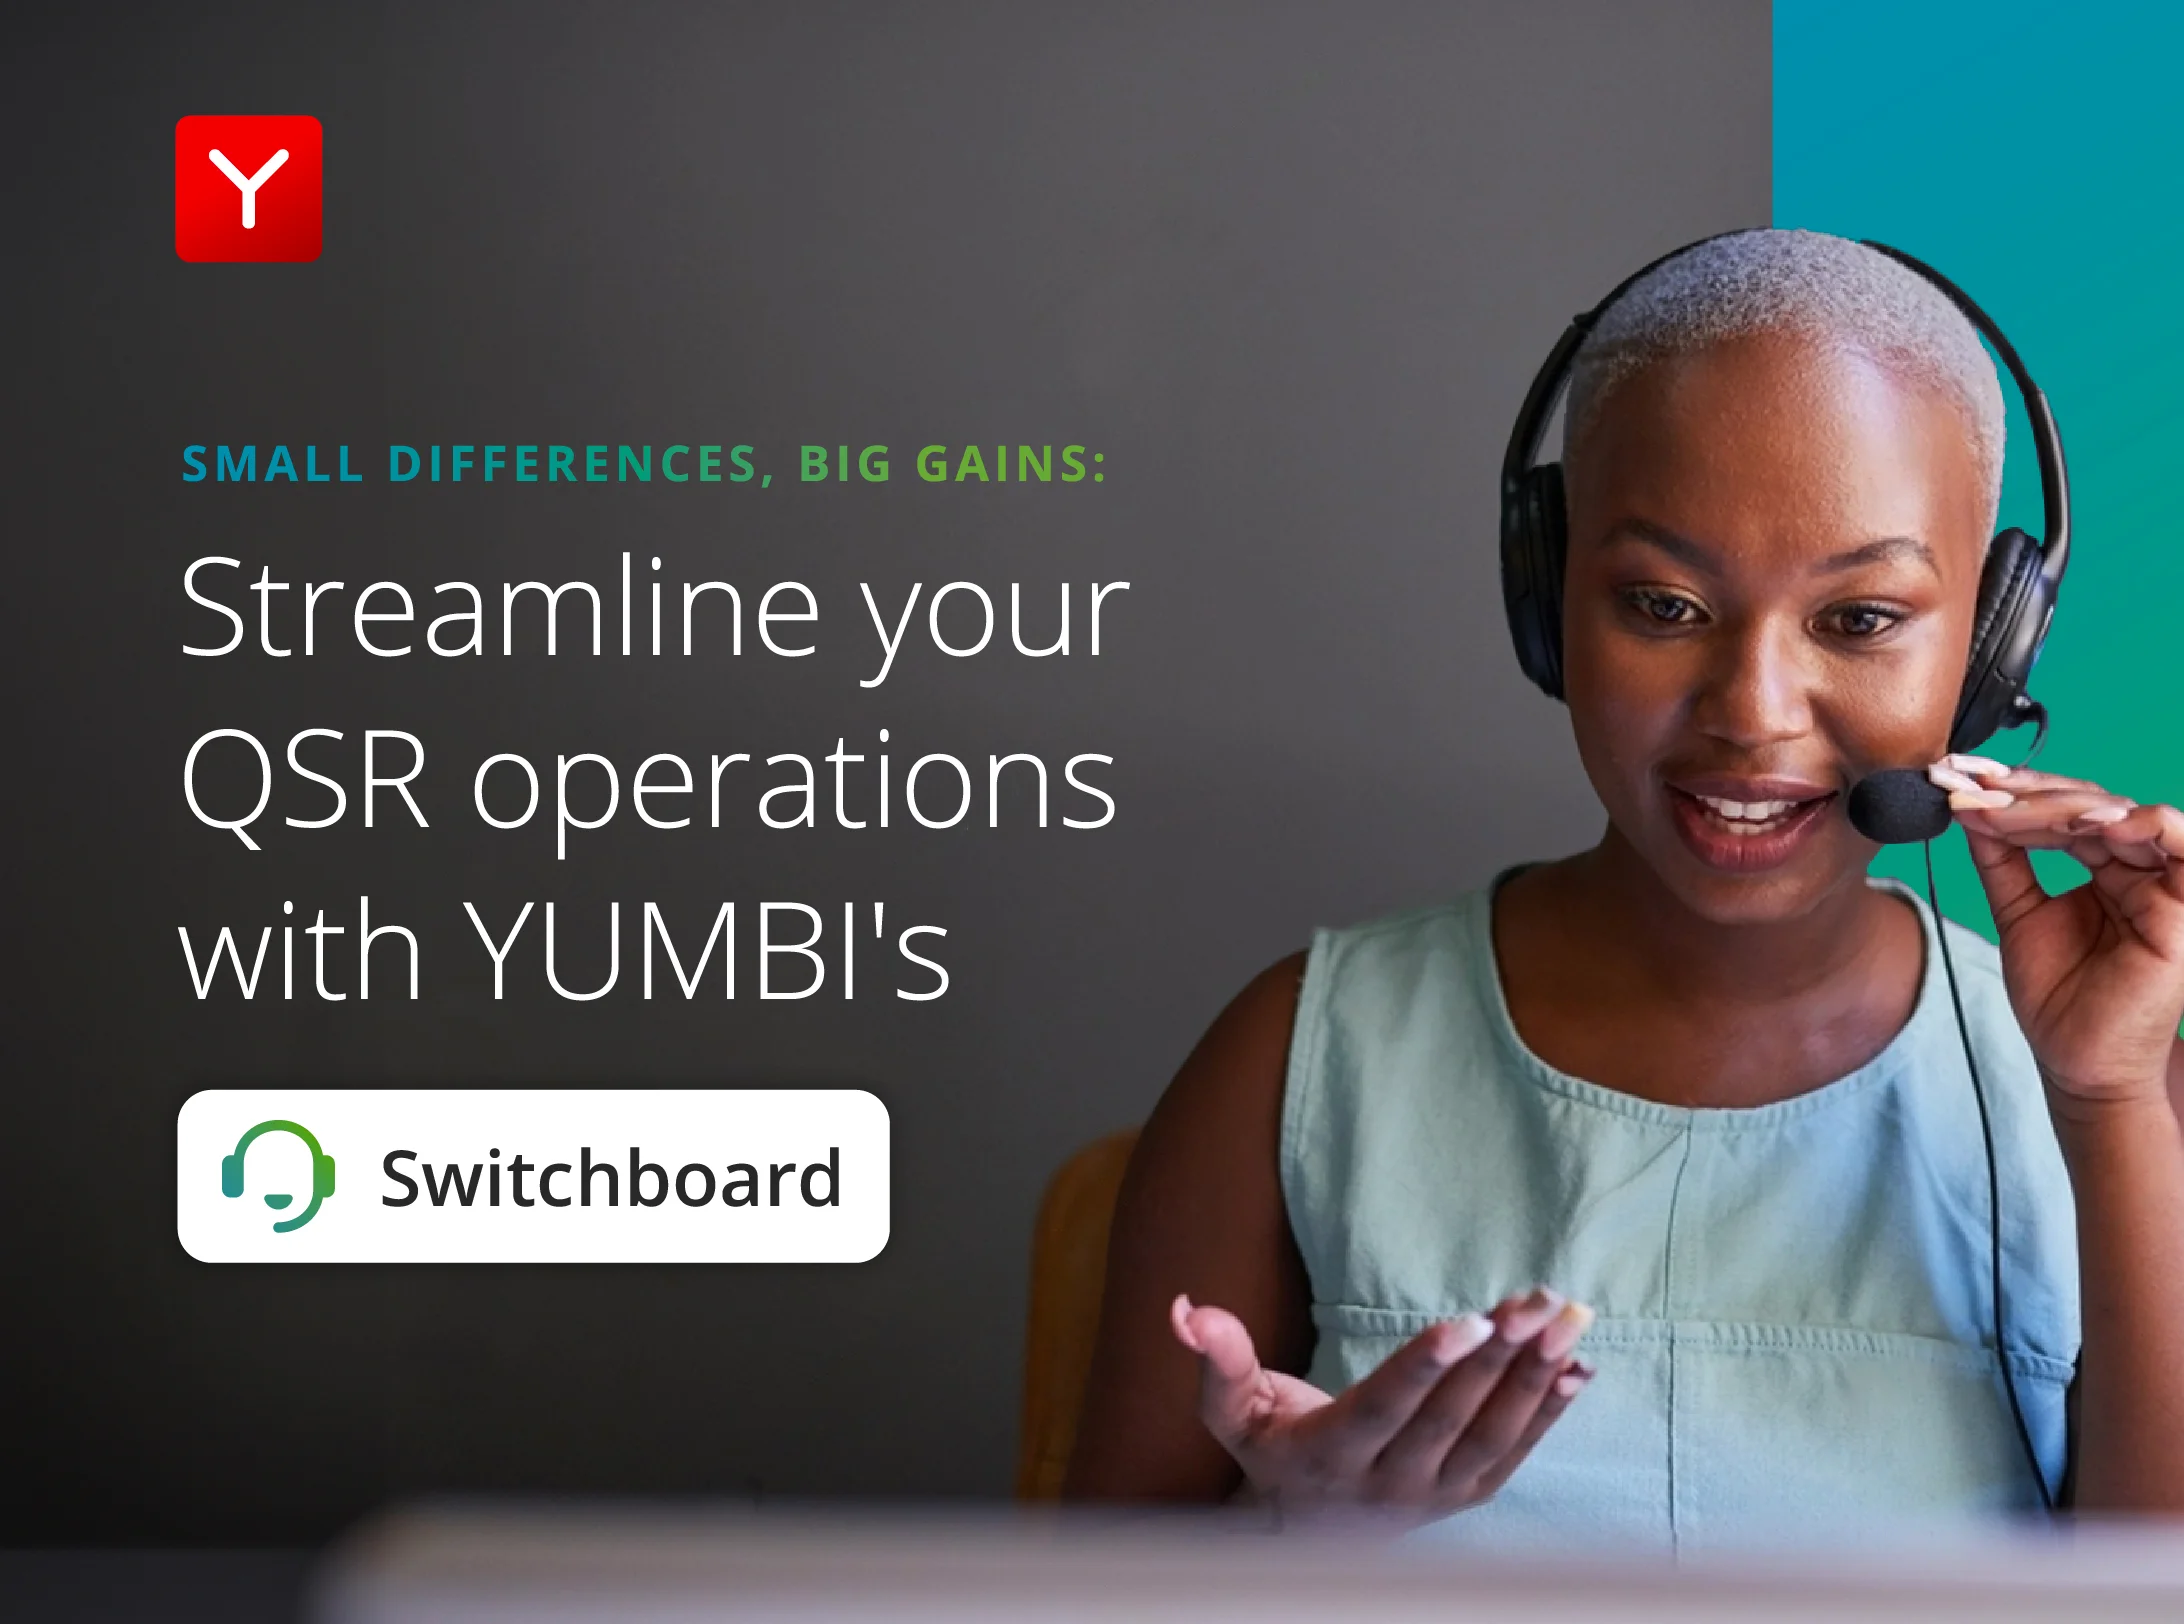 Small differences, big gains: Streamline your QSR operations with YUMBI's Switchboard